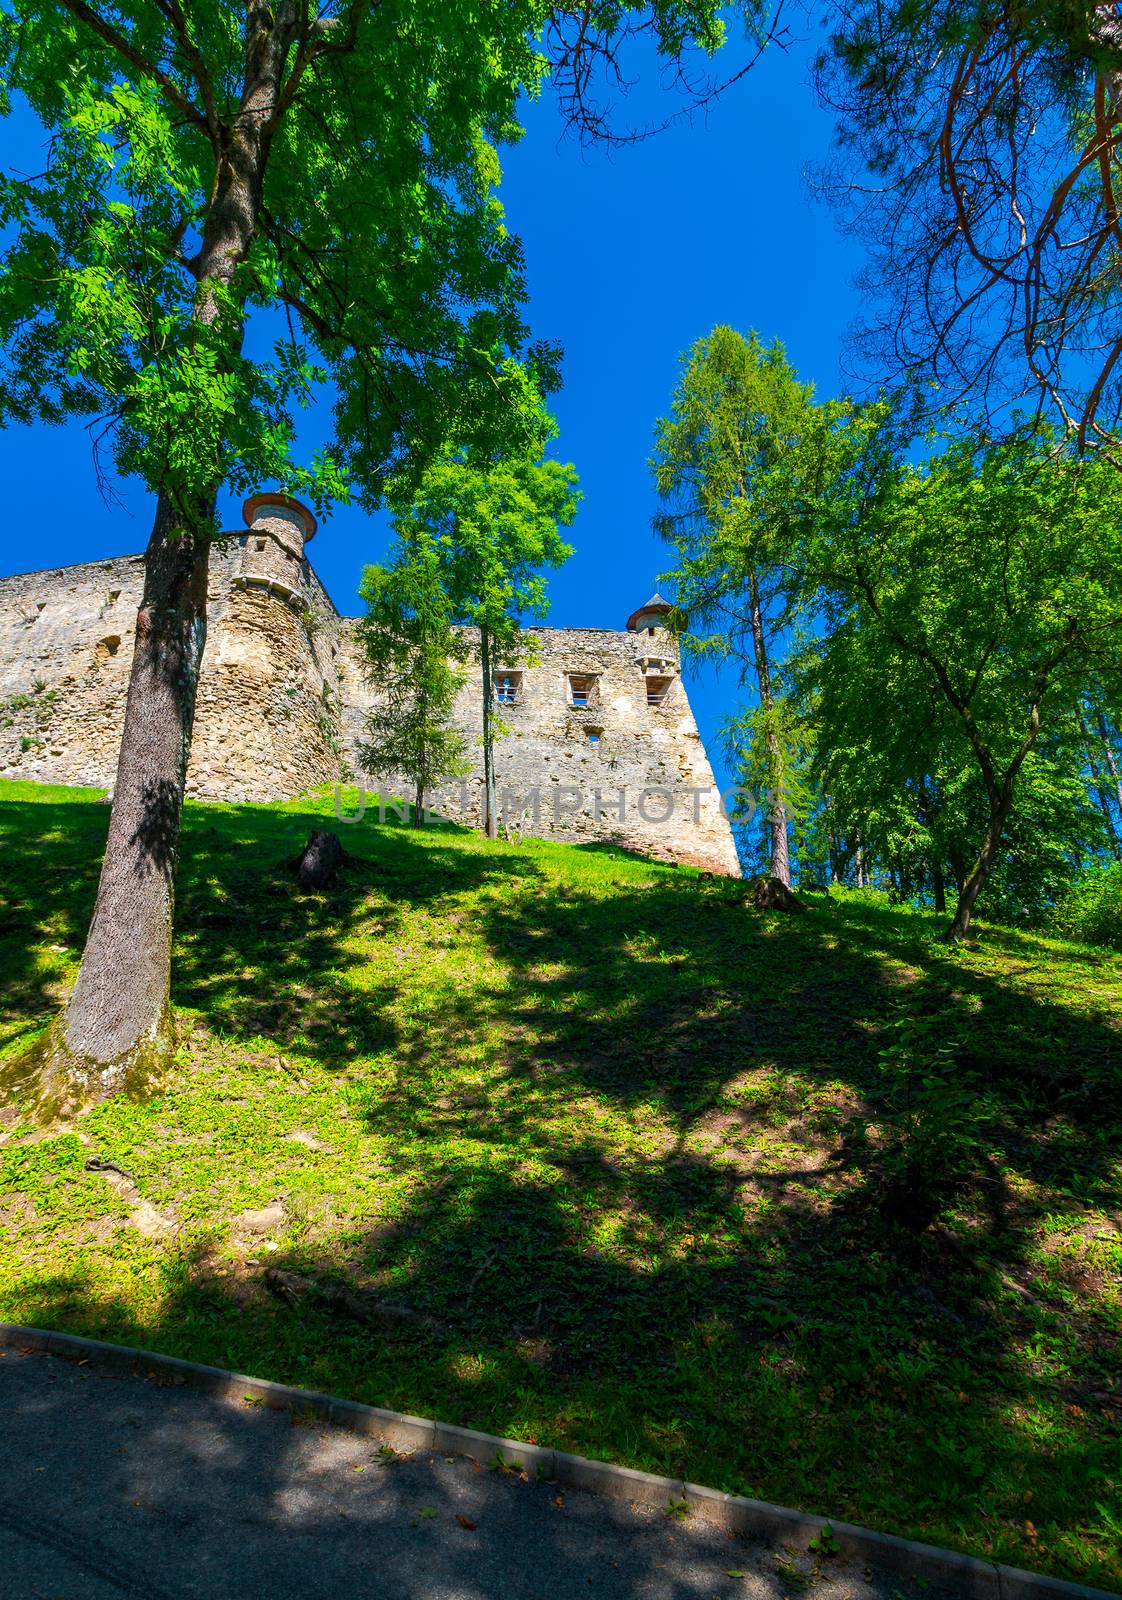 Stara Lubovna Castle of Slovakia on the hillside. beautiful medieval architecture. popular tourist attraction. lovely summer scenery